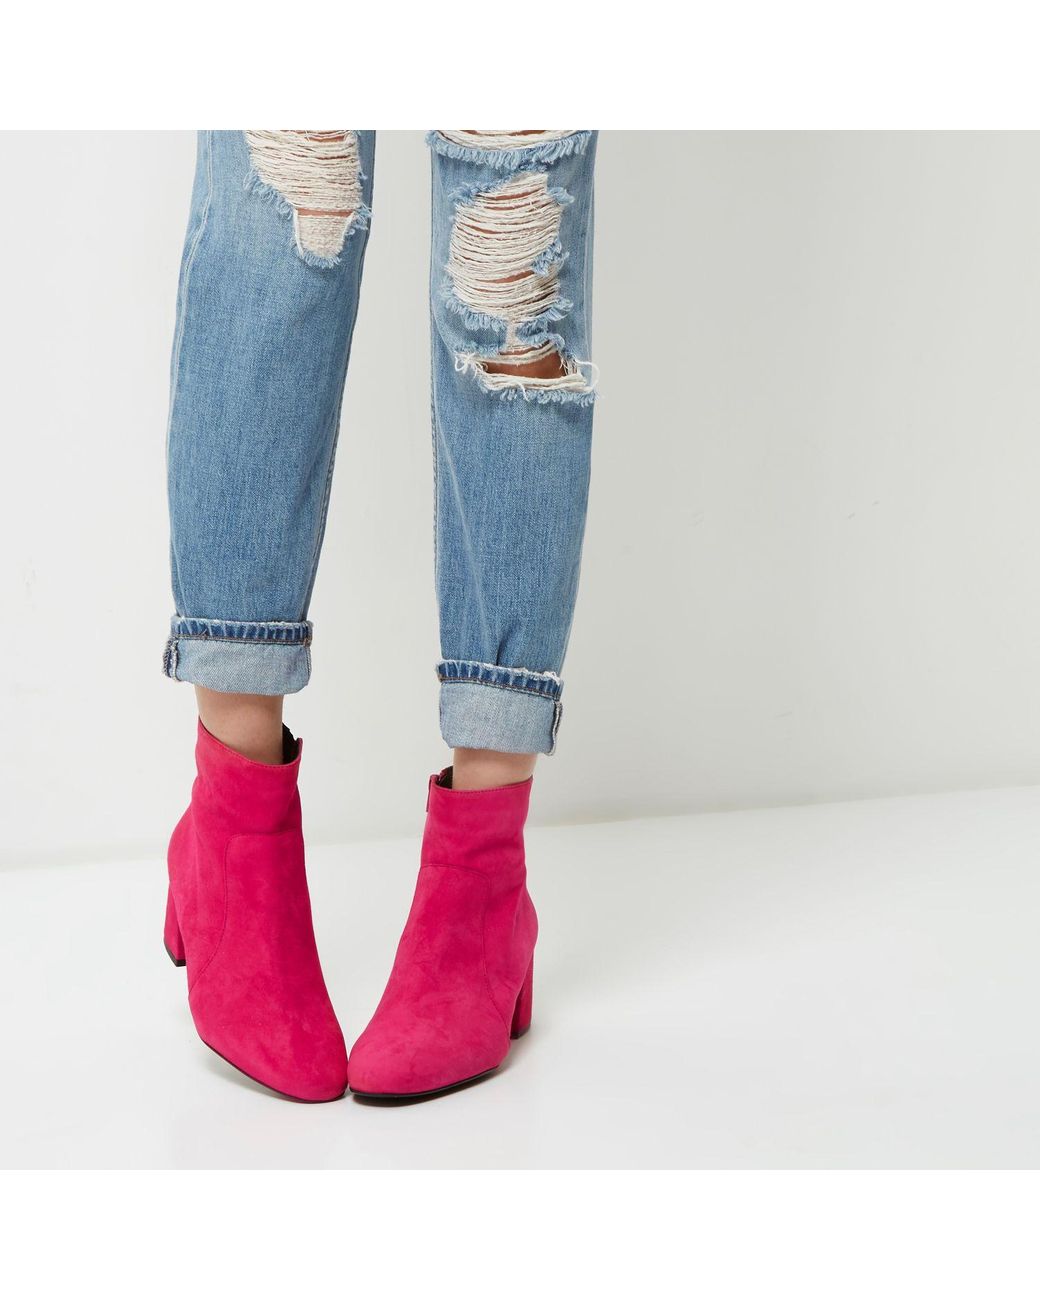 River Island Bright Pink Suede Block Heel Ankle Boots | Lyst UK